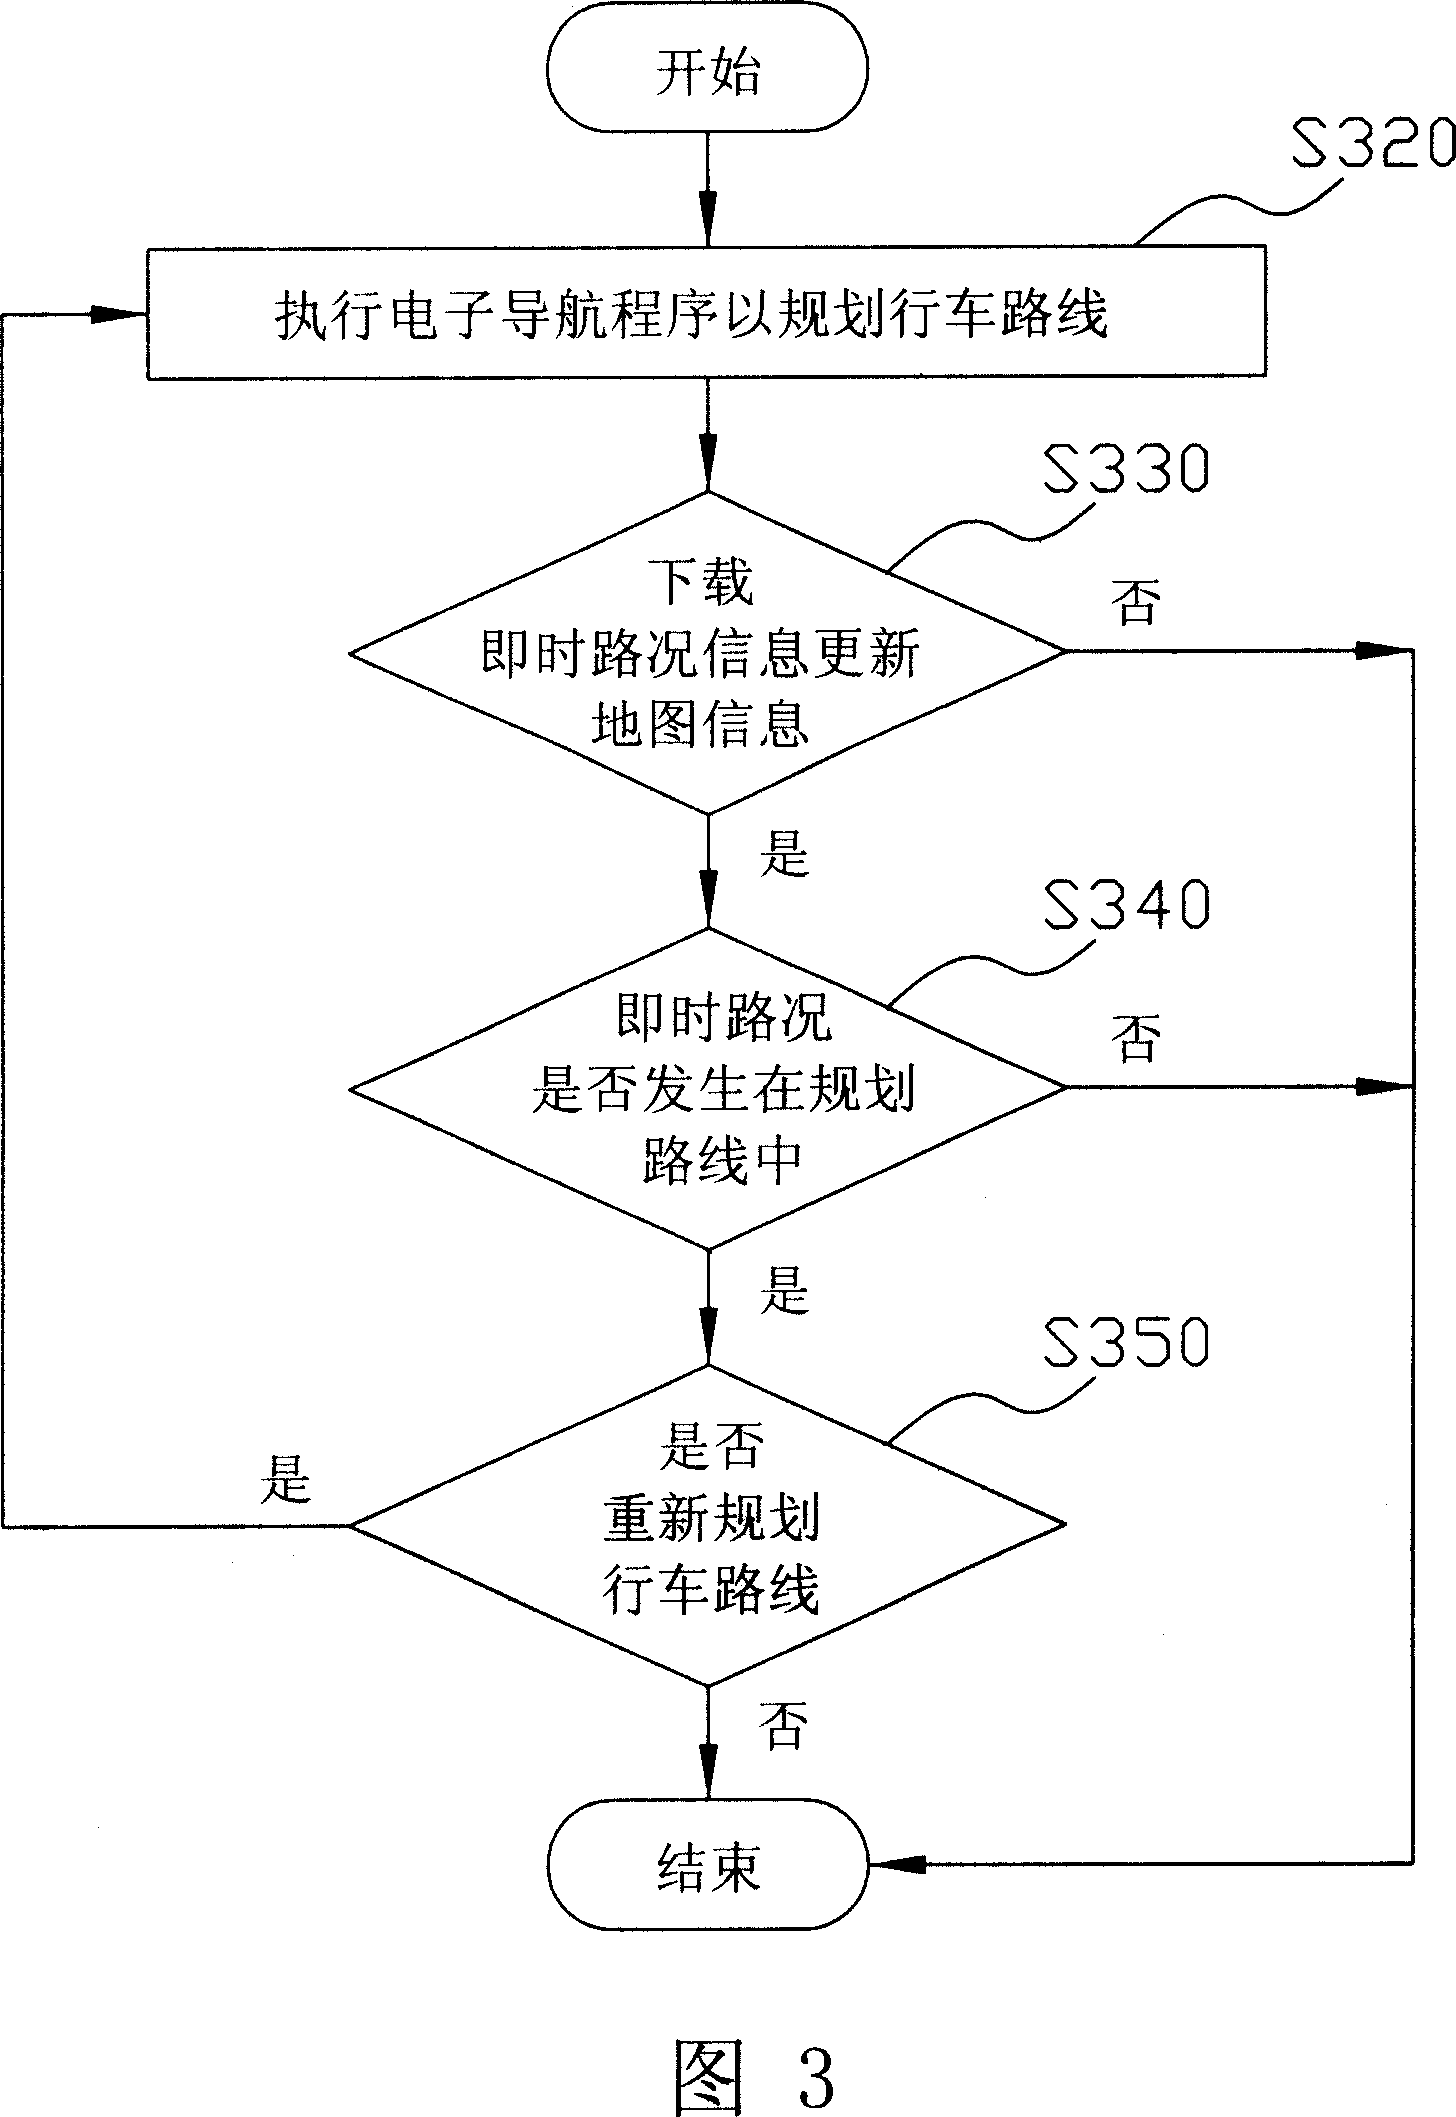 System and method for planning travel way